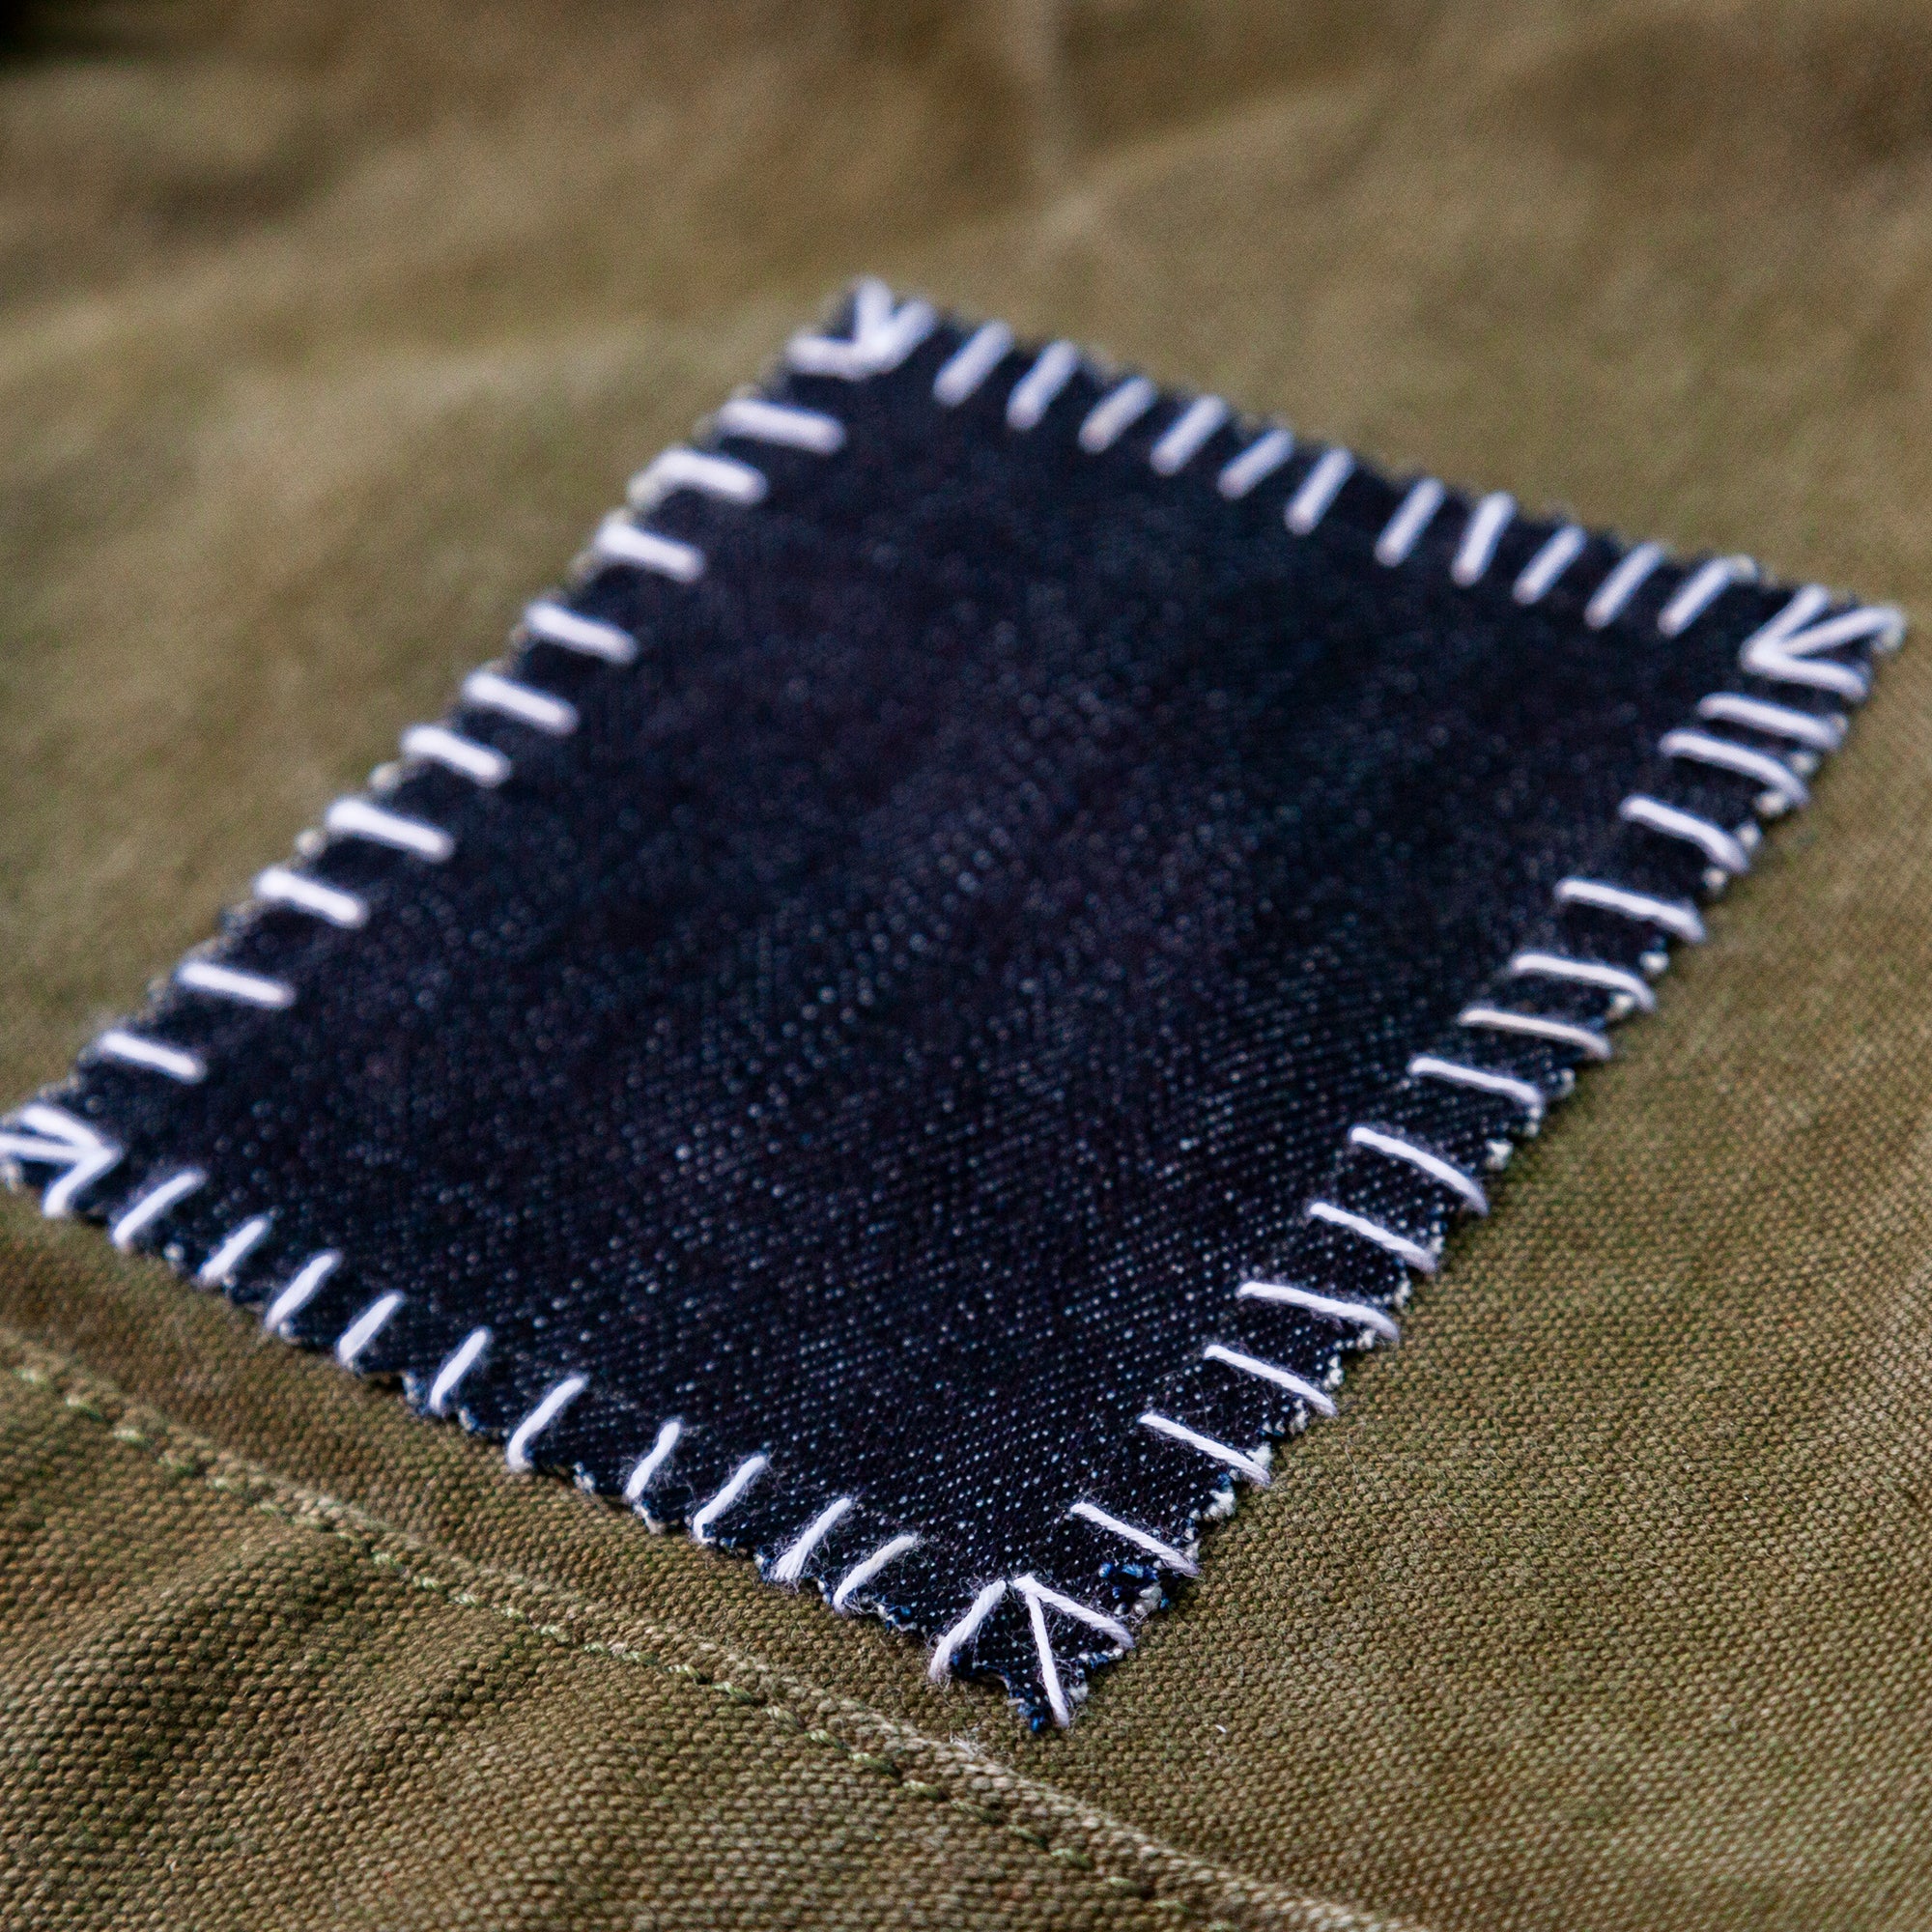 How to SEW A PATCH on Denim (EASY), TUTORIAL